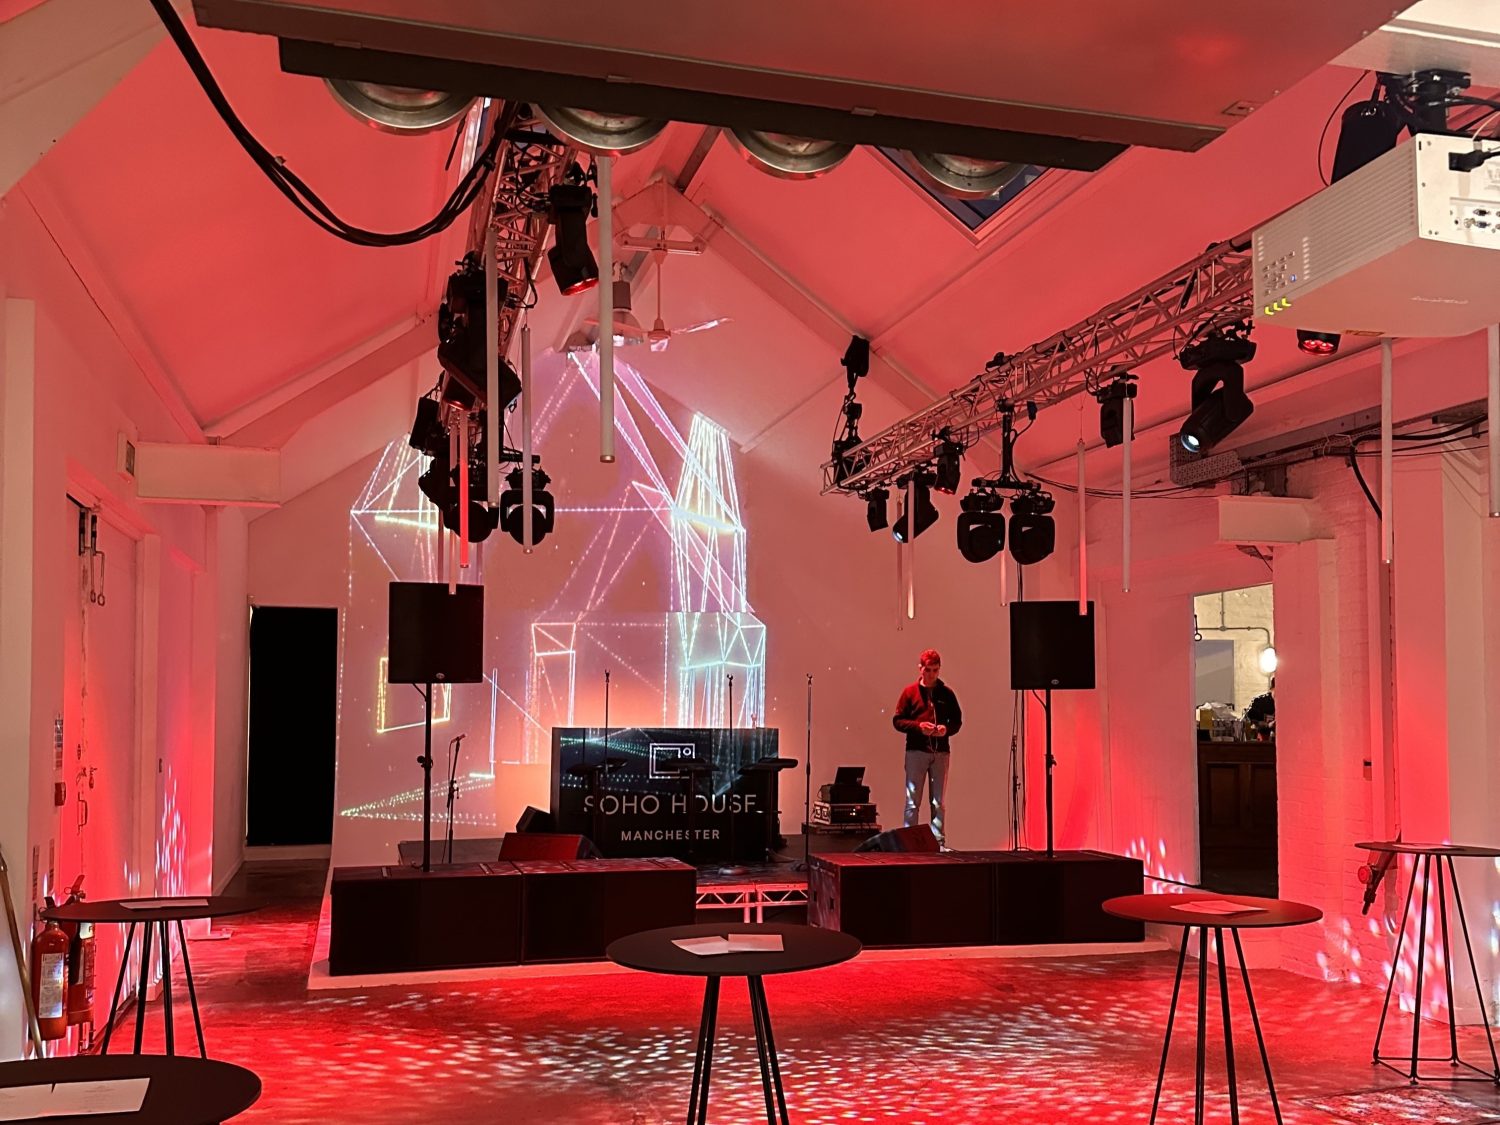 Indoor event space with red lighting and a dj booth labeled "soho dj house manchester". Holographic light structures illuminate the stage, surrounded by empty high-top tables.